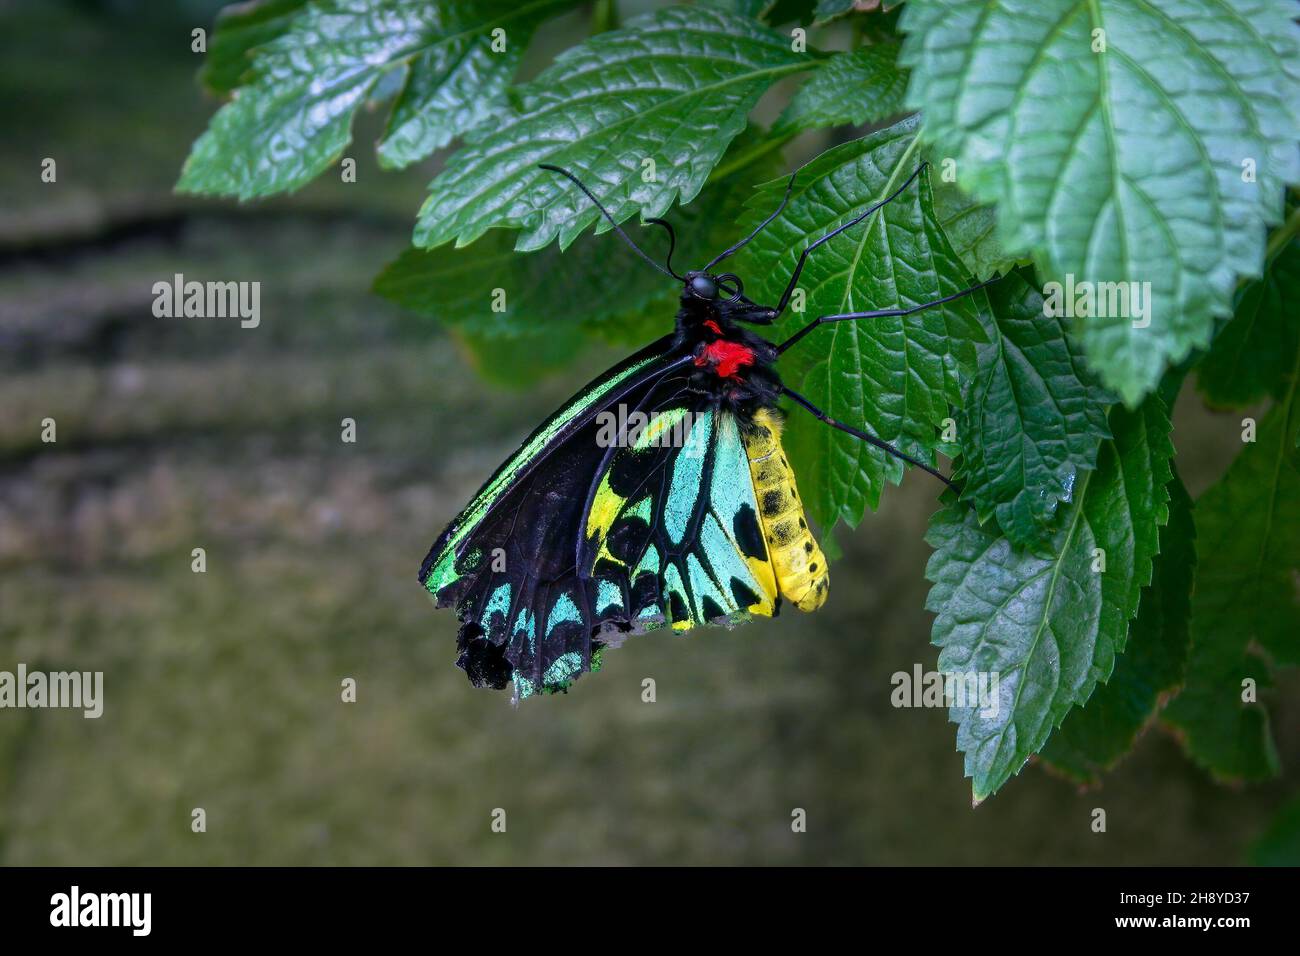 Colourful male Cairns Birdwing butterfly, Australia's largest endemic butterfly species, perched on a green leaf Stock Photo